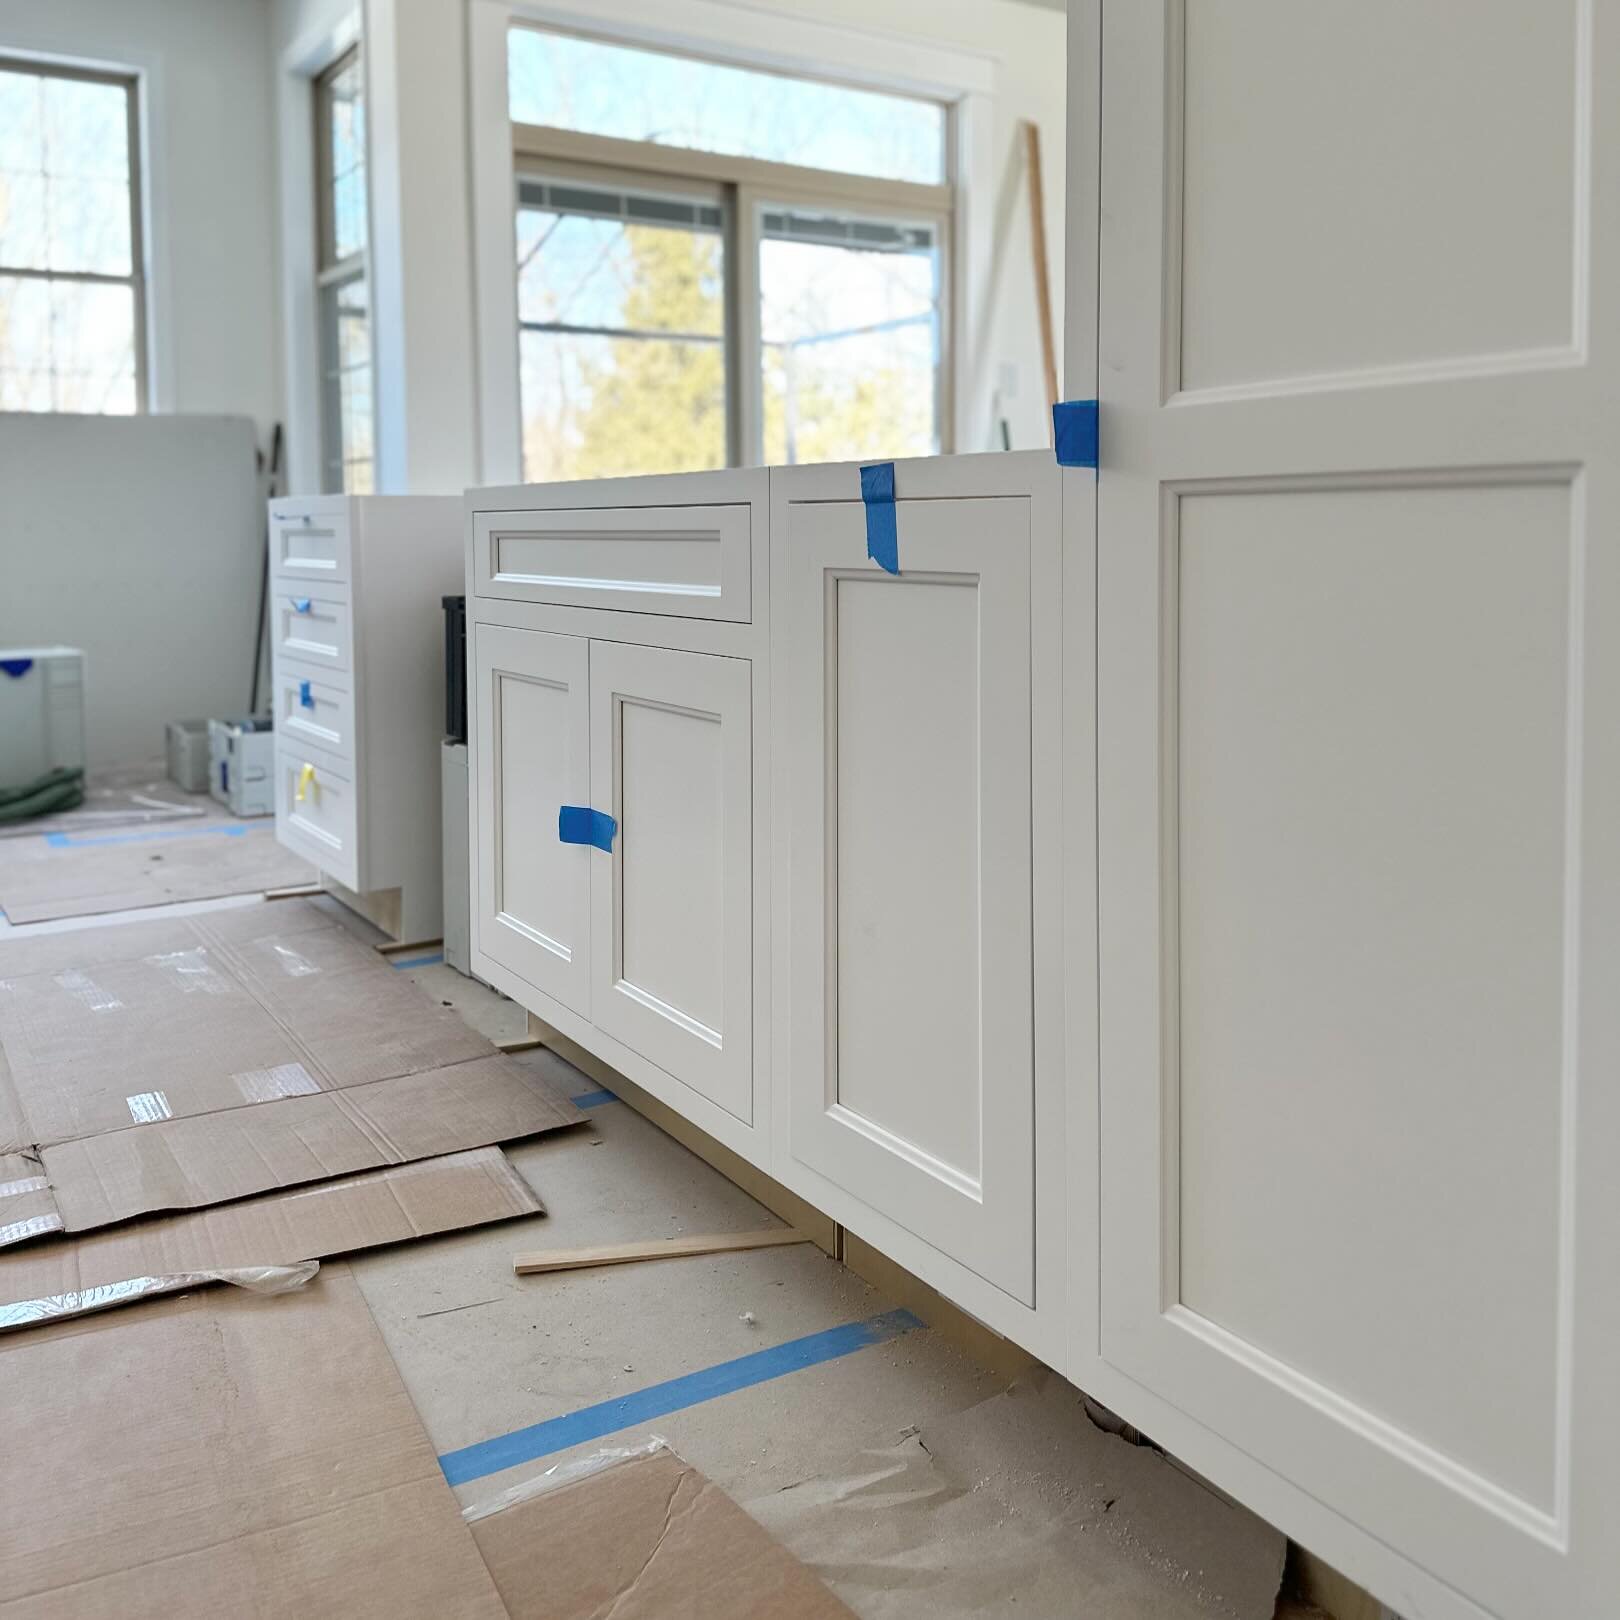 Some beautiful inset cabinetry being installed today.
▪️⠀⠀⠀⠀⠀⠀⠀⠀⠀
What can we build for you?
▪️⠀⠀⠀⠀⠀⠀⠀⠀⠀
#bobeckbuilt
▪️⠀⠀⠀⠀⠀⠀⠀⠀⠀
#qualityoverquanity #carpenter #buildingamerica #craftsmanship #kitchen #cabinets #kitchendesign #kitchenrenovation #leh